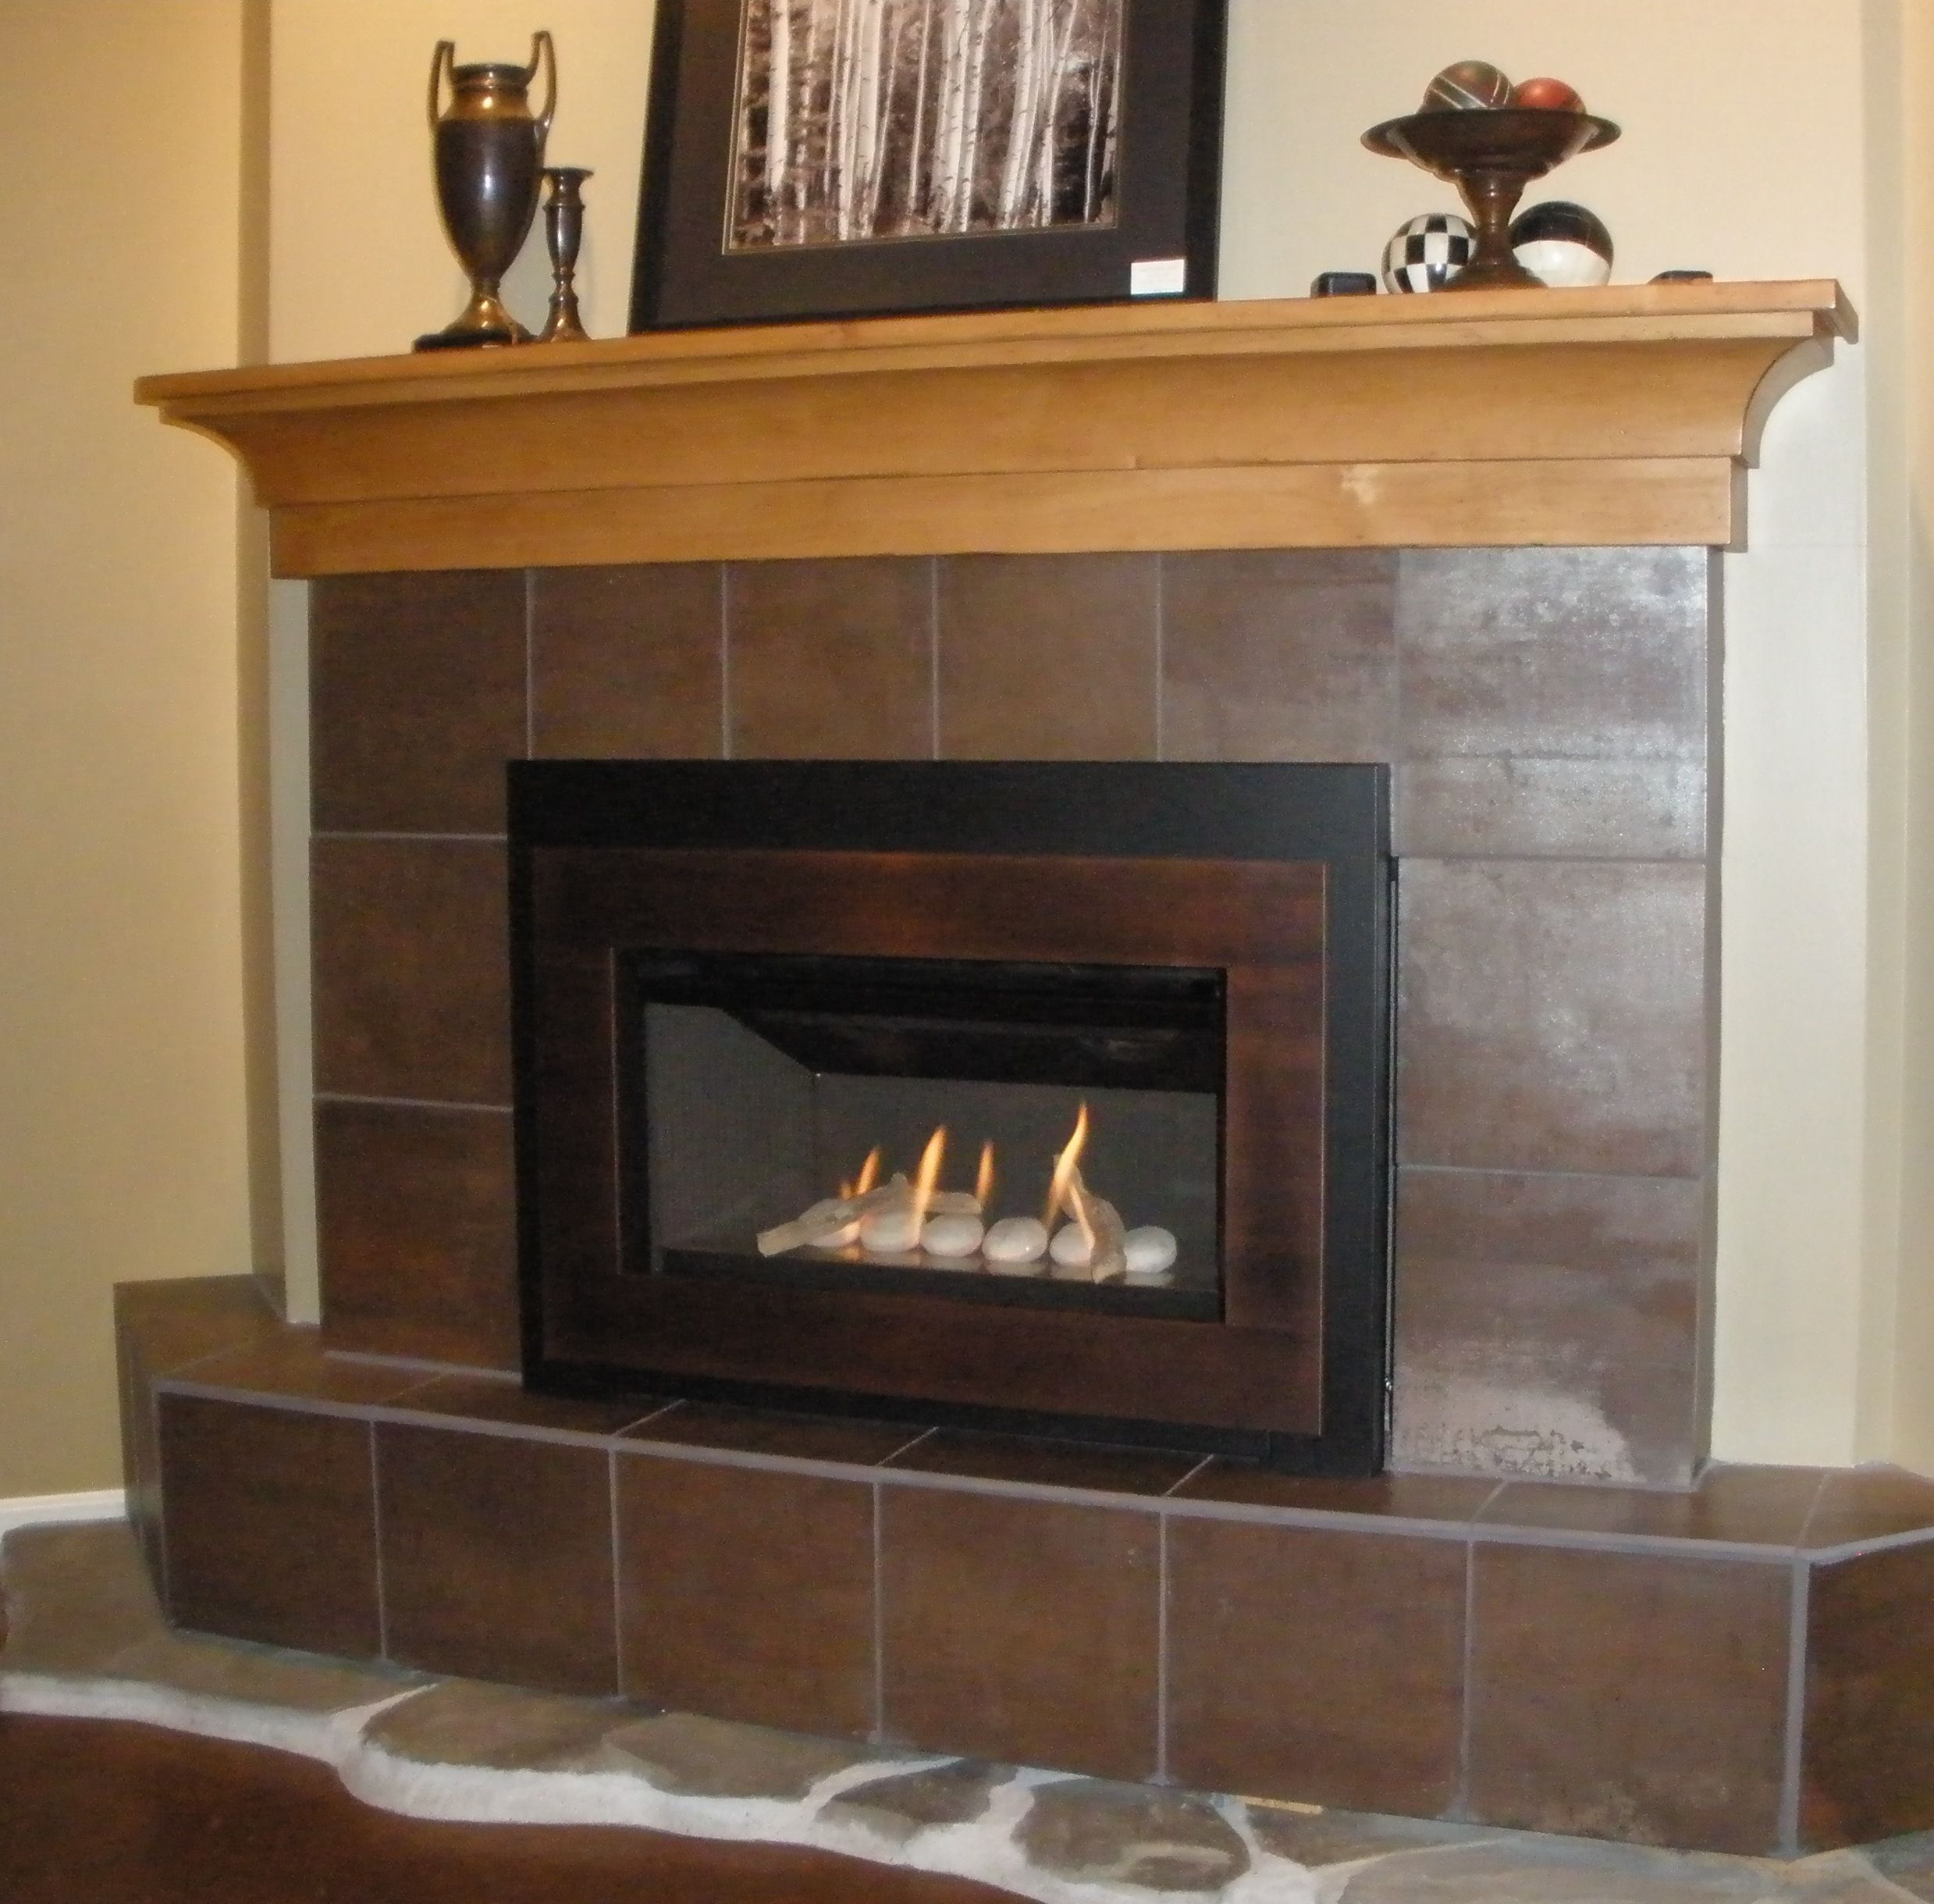 Wayfair Fireplace Inserts Awesome Pin On Valor Radiant Gas Fireplaces Midwest Dealer